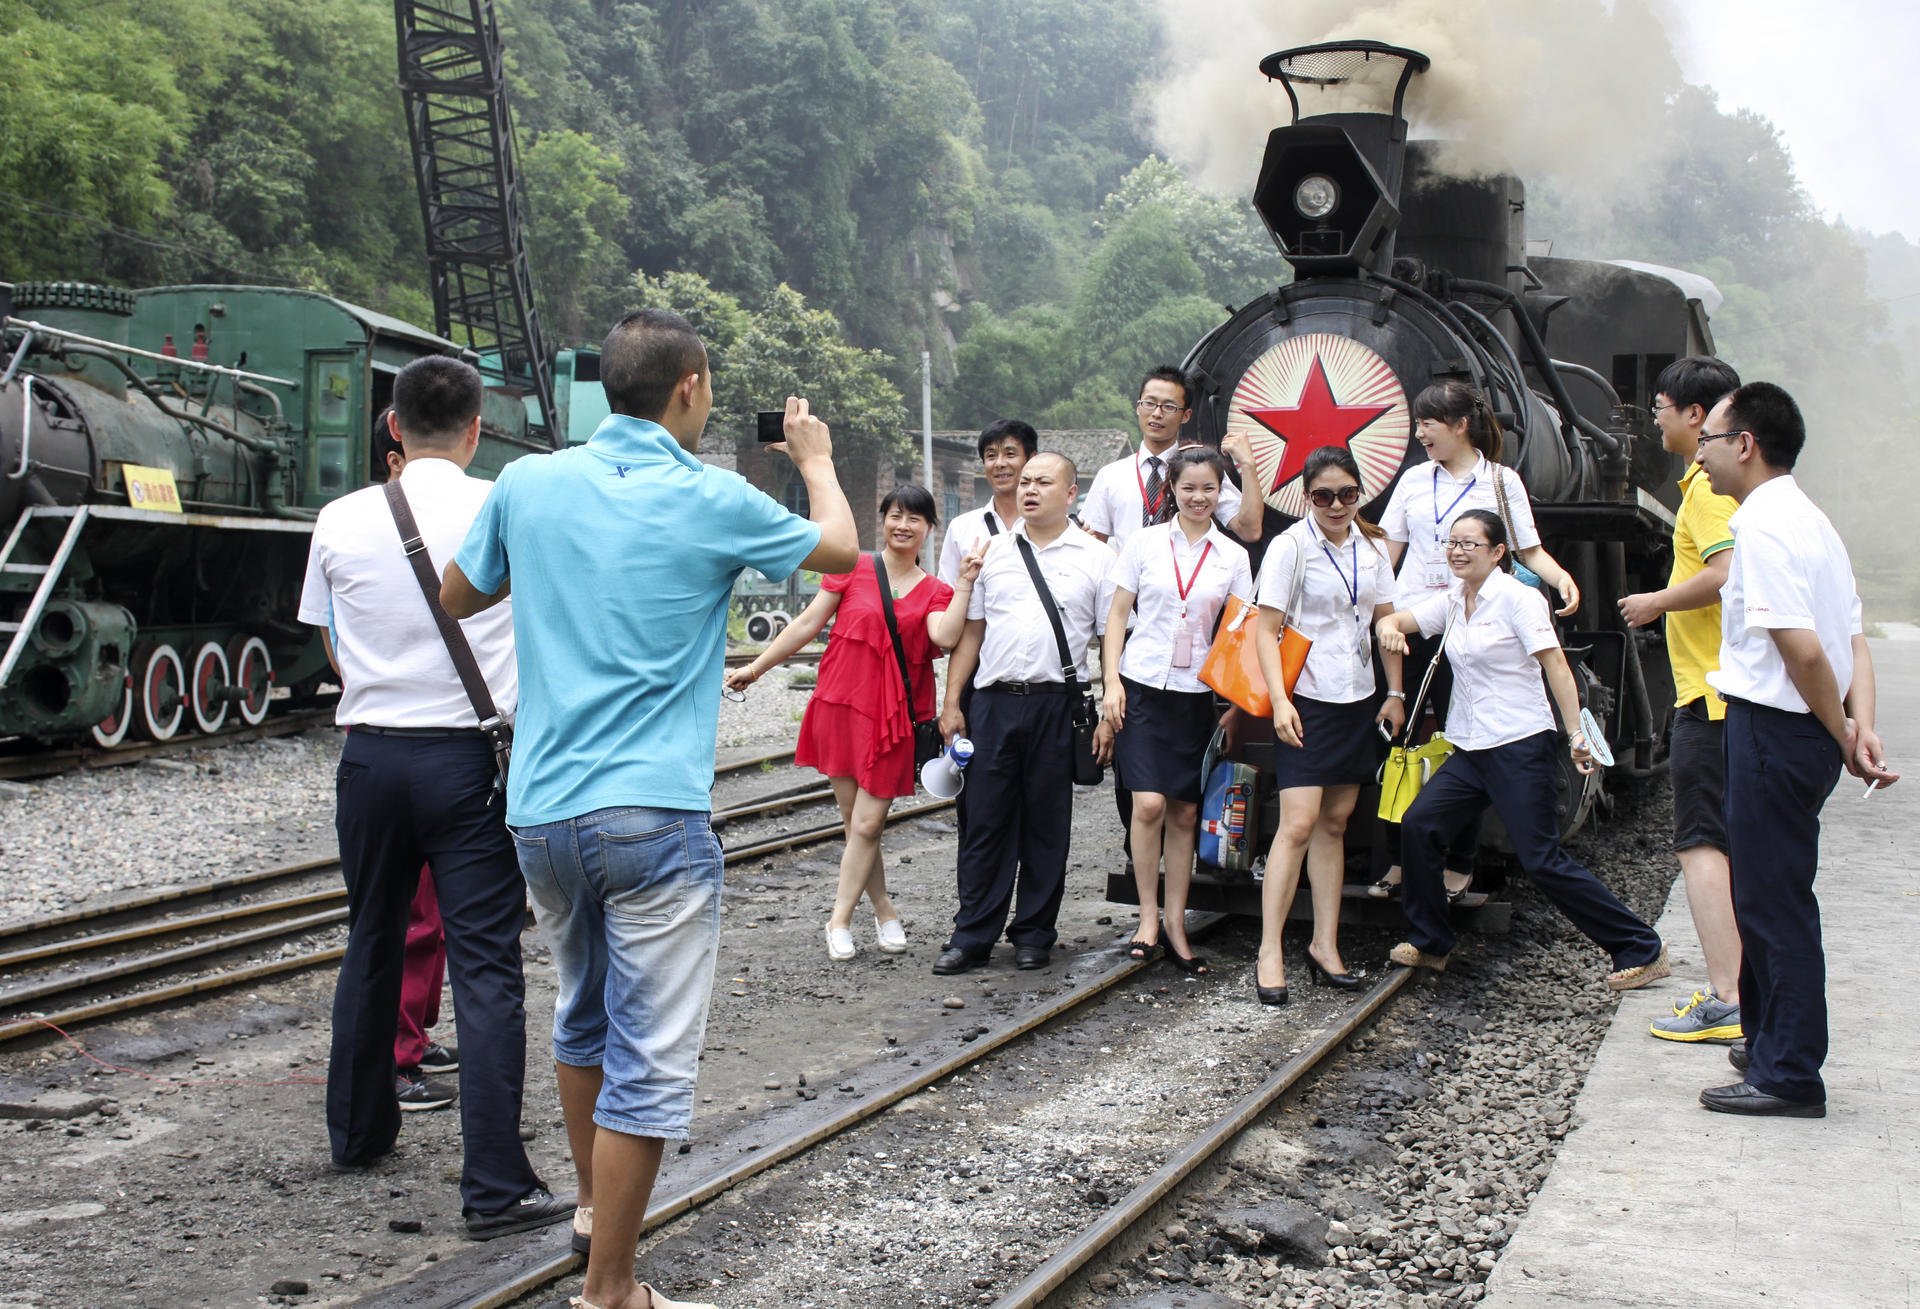 Visitors pose in front a steam engine on the Jiayang Railway line.